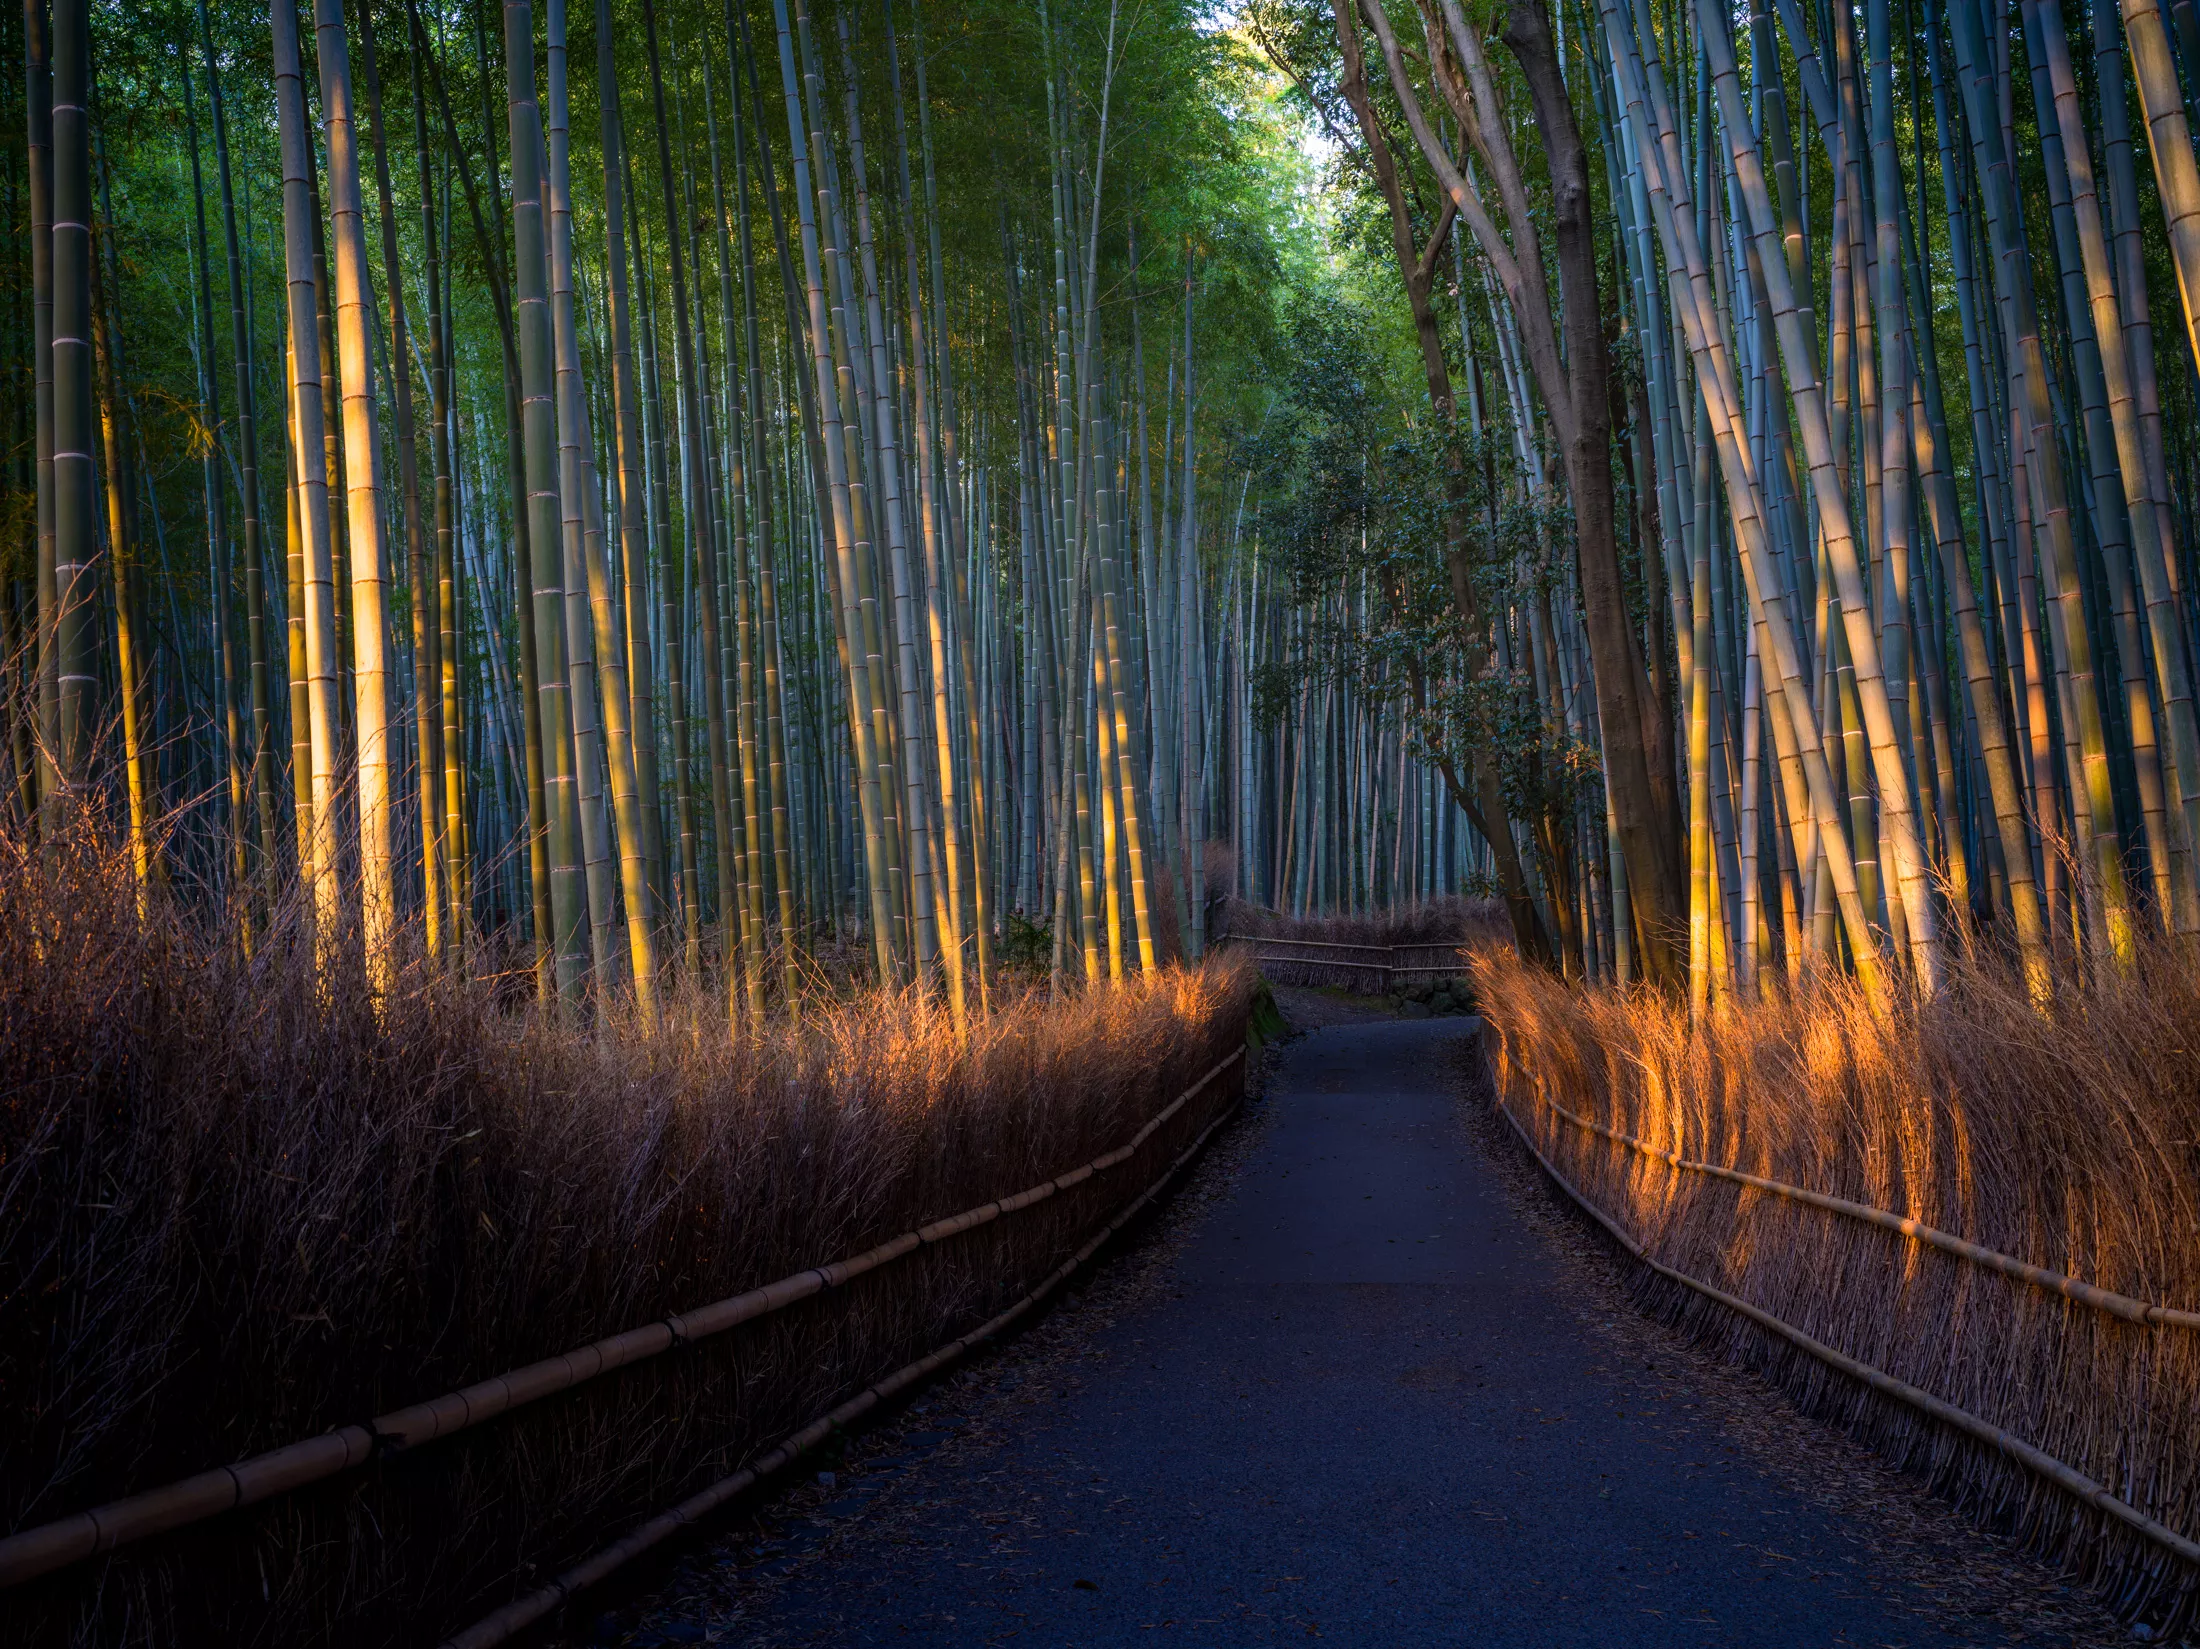 Arashiyama Bamboo Forest in Japan, East Asia | Nature Reserves,Love & Romance - Rated 3.2